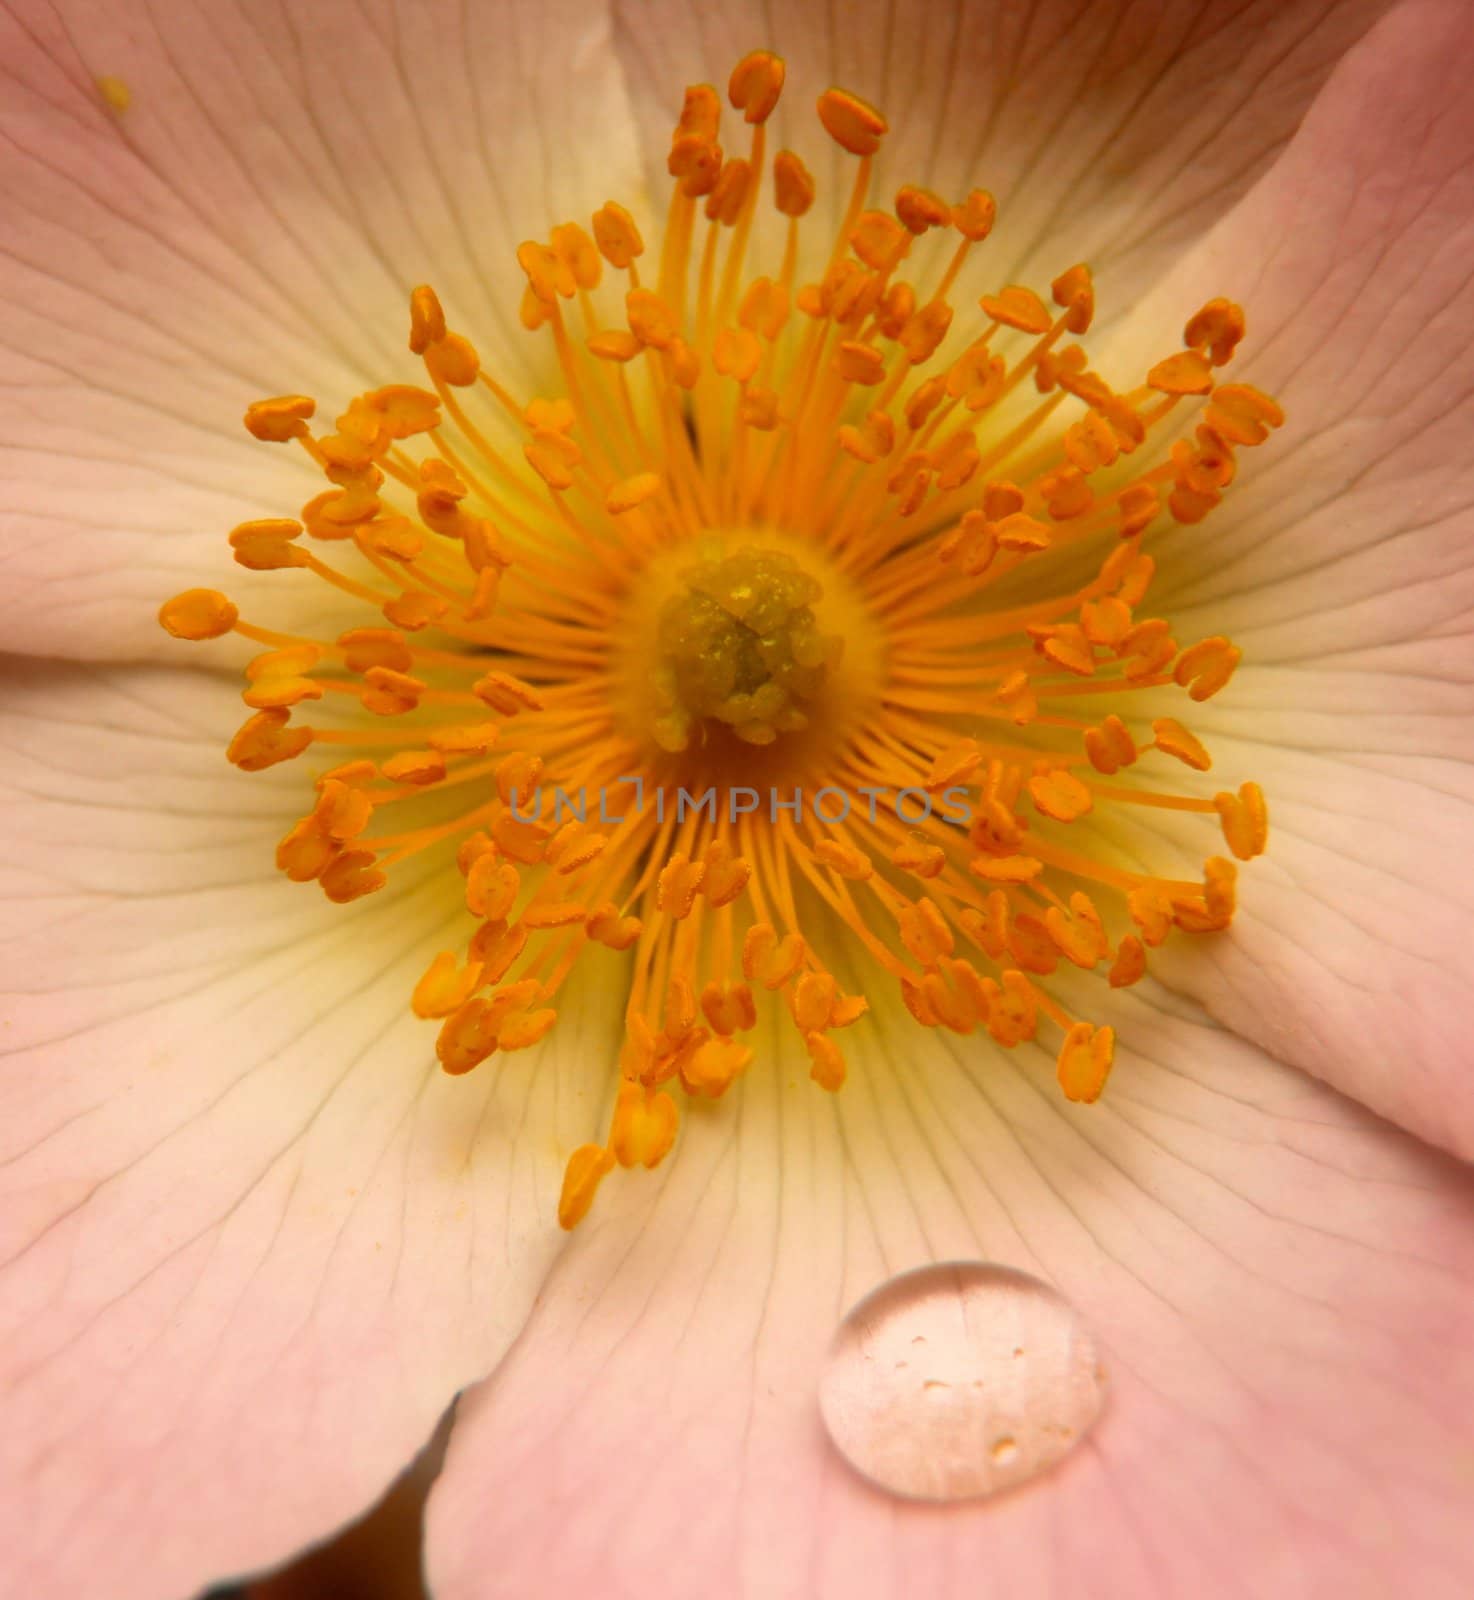 Near the stamen of a flower from a rain drop from.